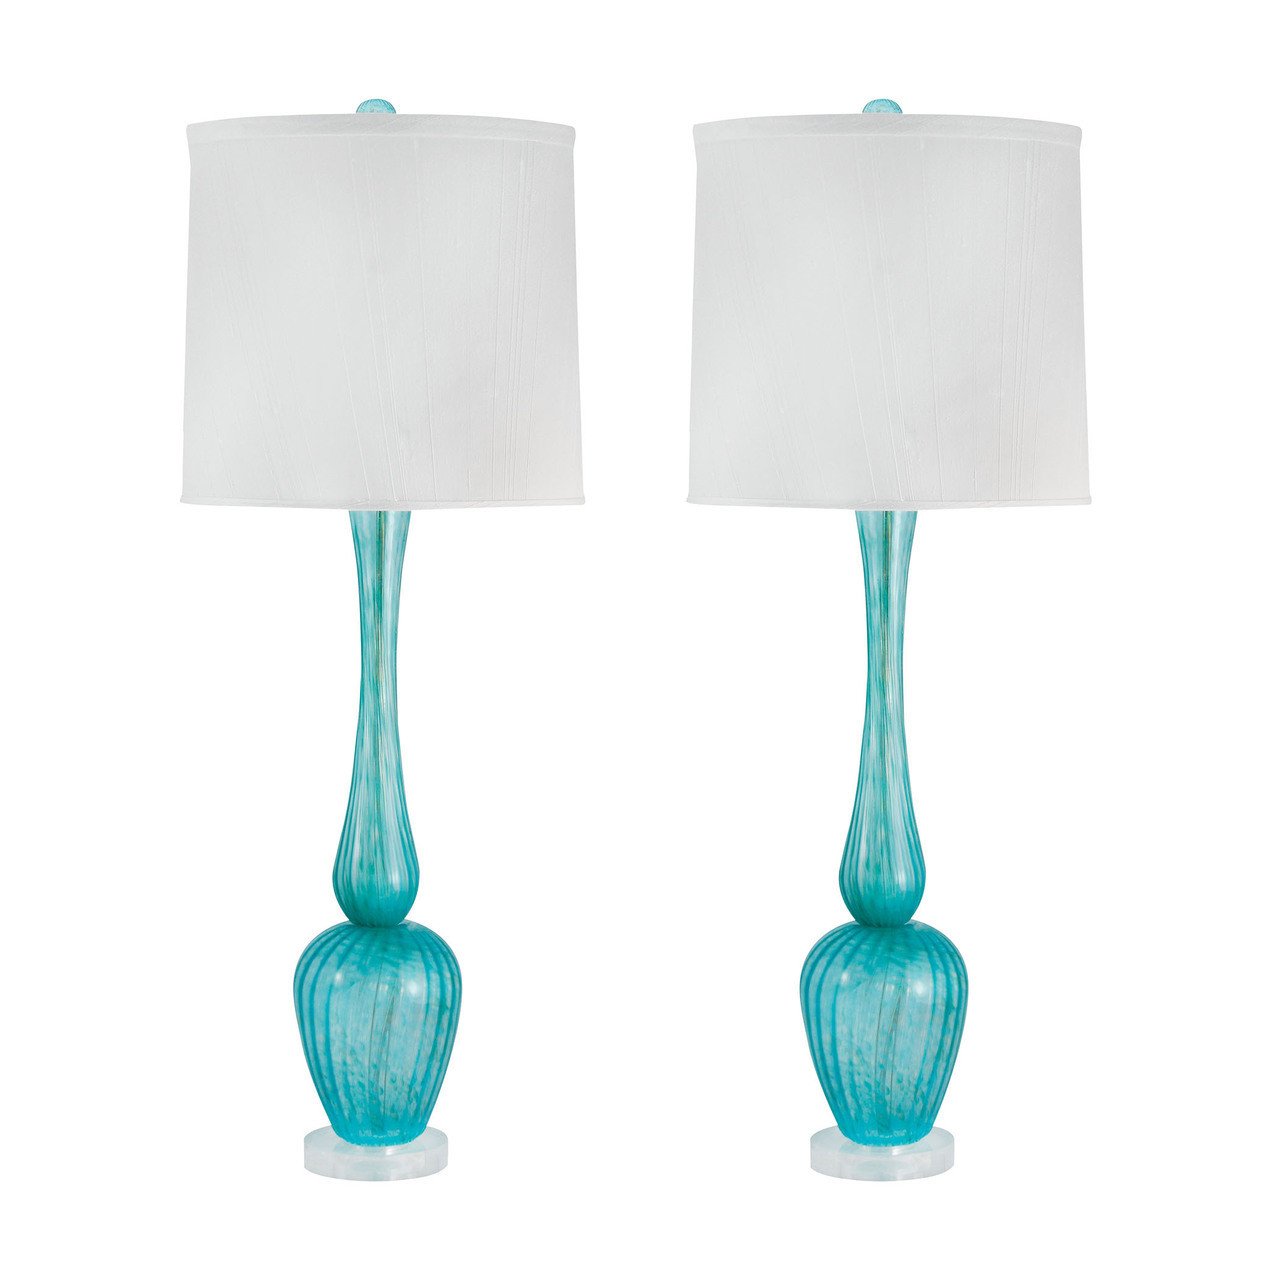 Lamp Works New Product  Serrated Venetian Glass Table Lamp In Blue 315/S2 Sold by VaasuHomes